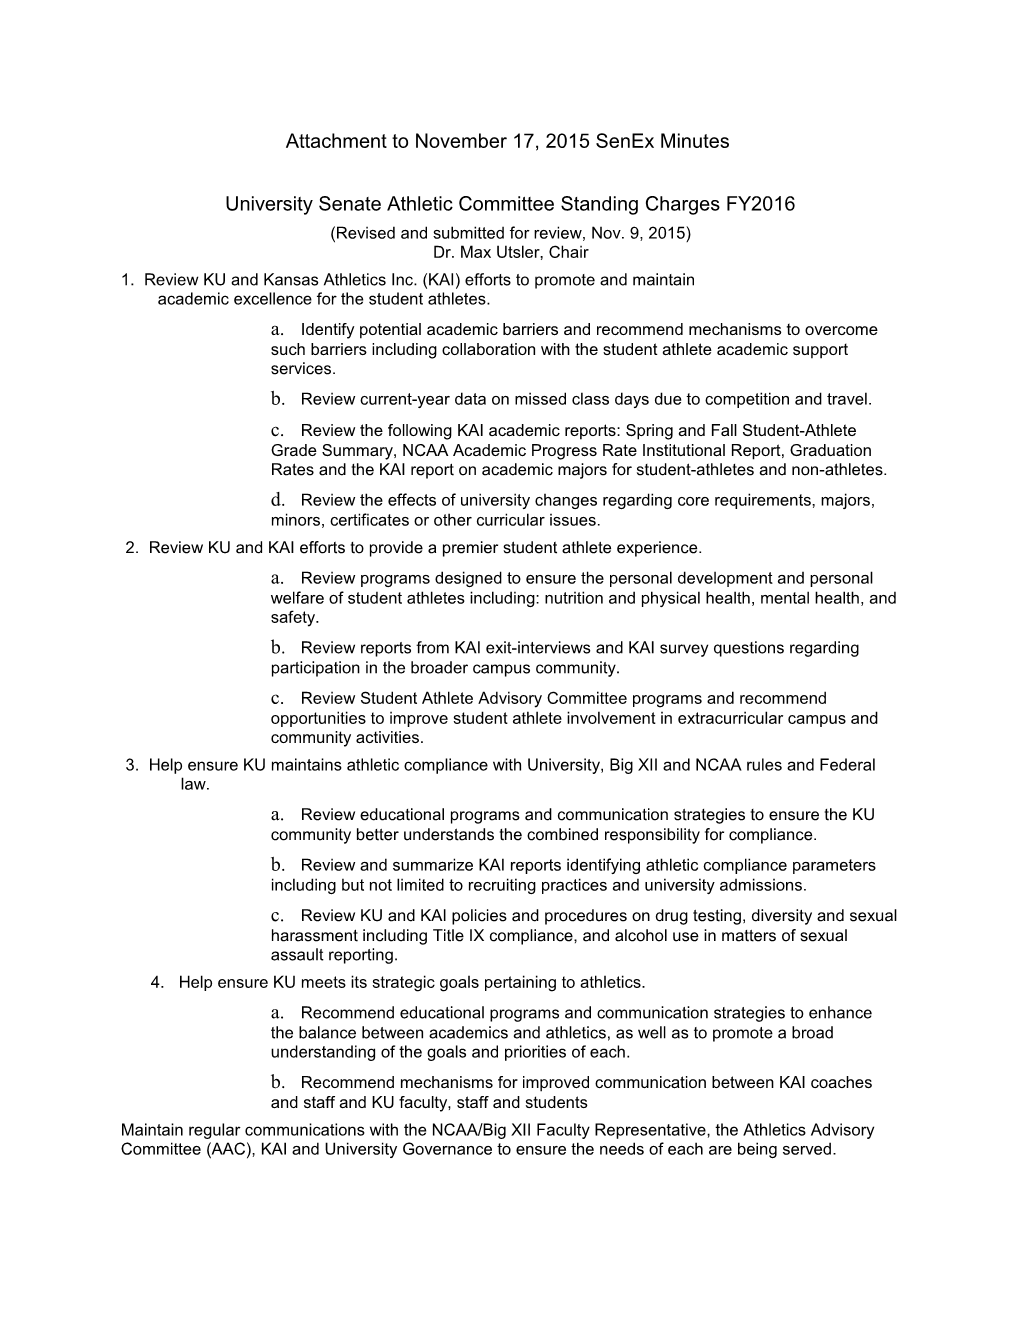 University Senate Athletic Committee Standing Charges FY2016